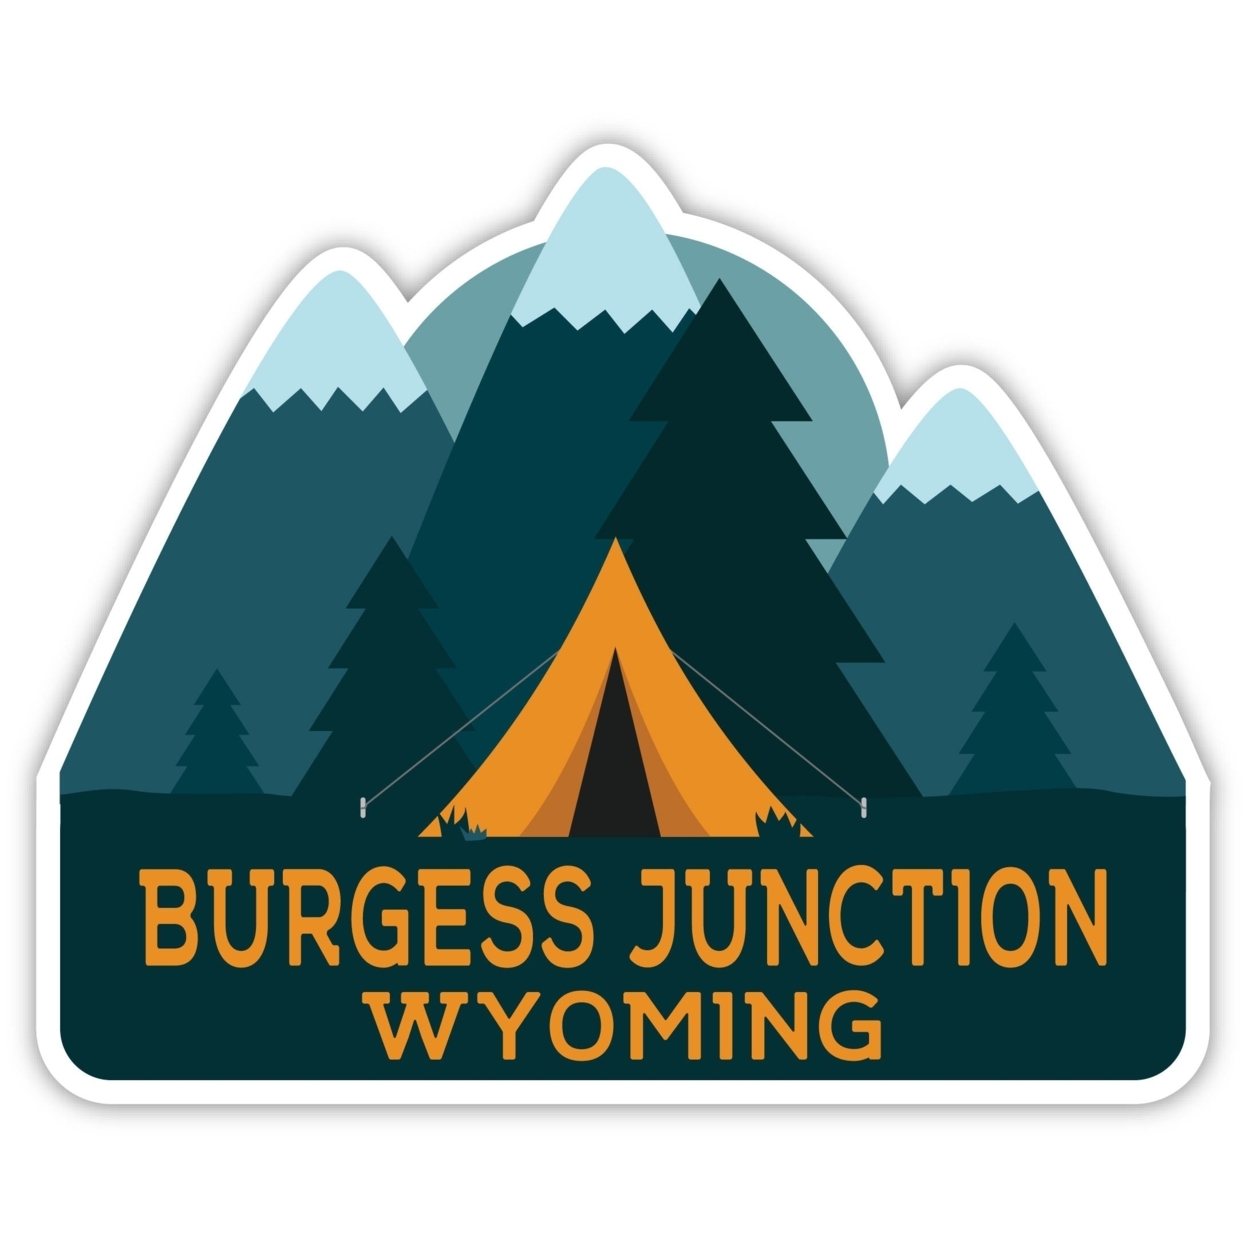 Burgess Junction Wyoming Souvenir Decorative Stickers (Choose Theme And Size) - Single Unit, 8-Inch, Bear